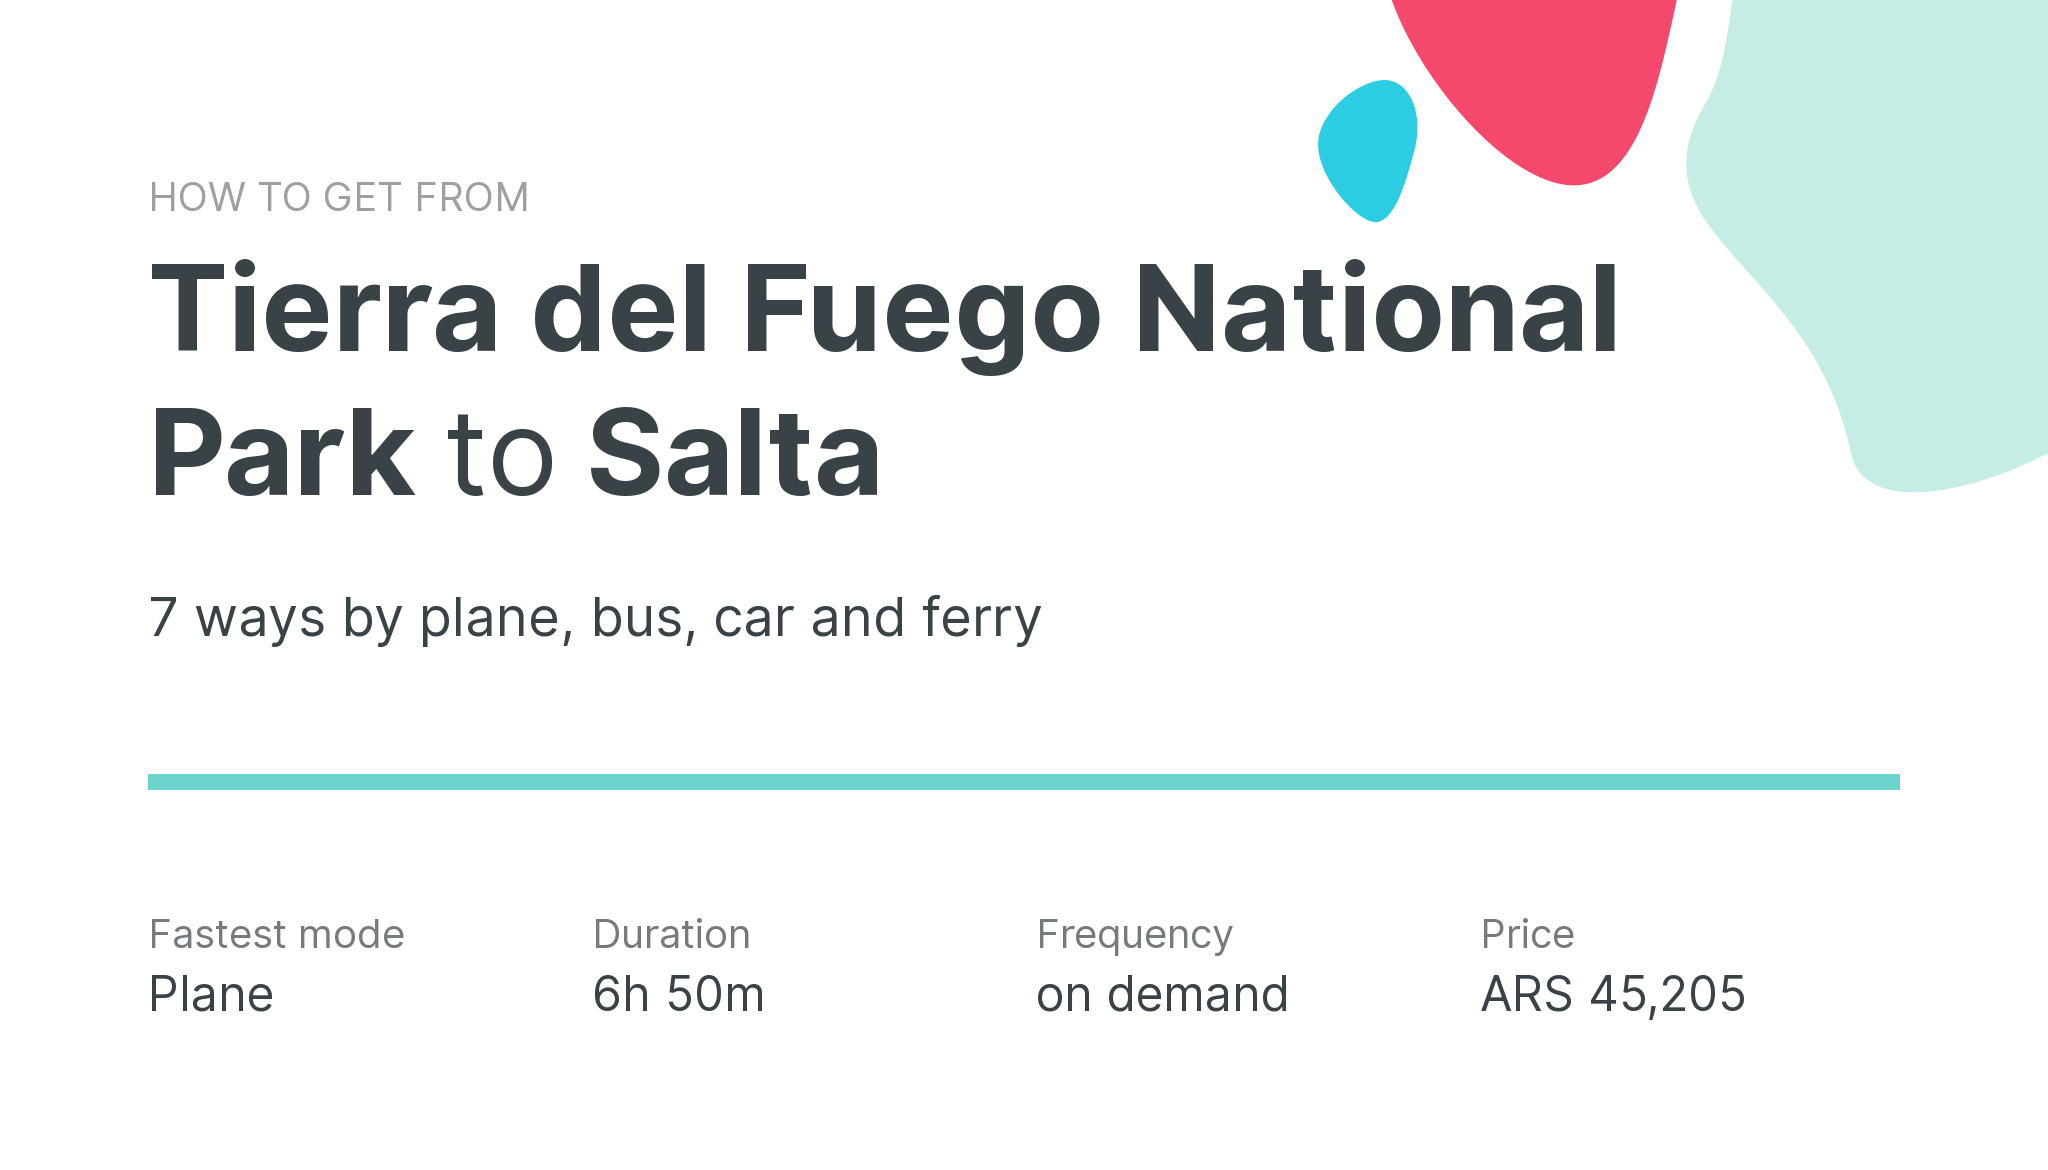 How do I get from Tierra del Fuego National Park to Salta